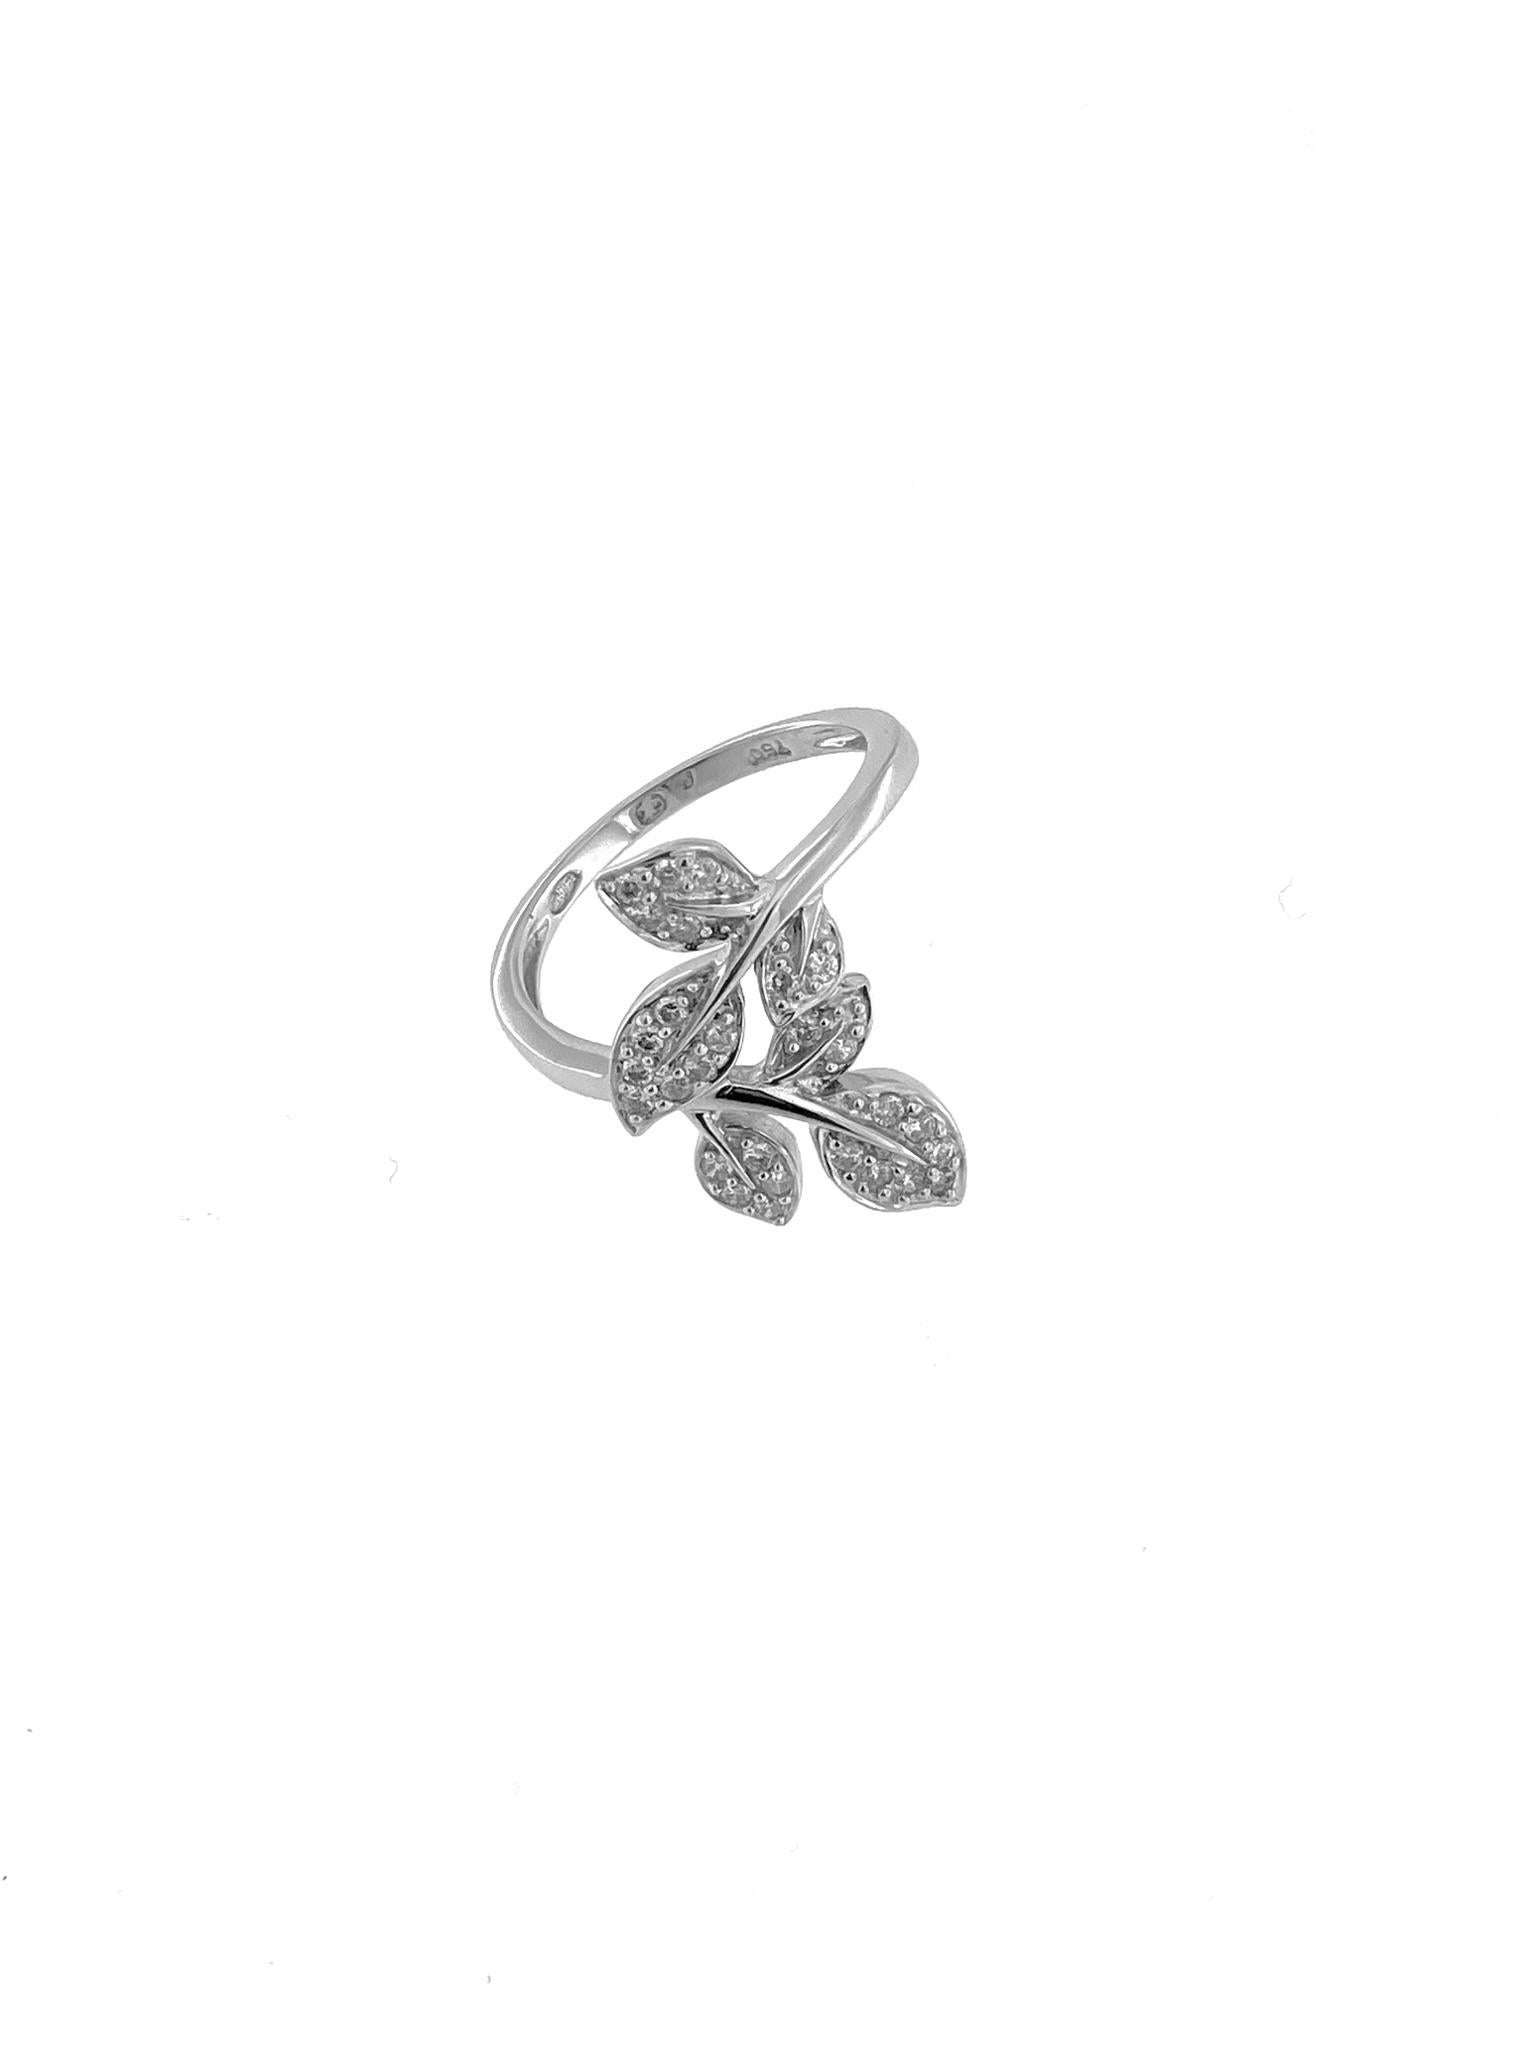 Brilliant Cut Modern Earrings and Ring Leaf Design Set White Gold and Diamonds For Sale